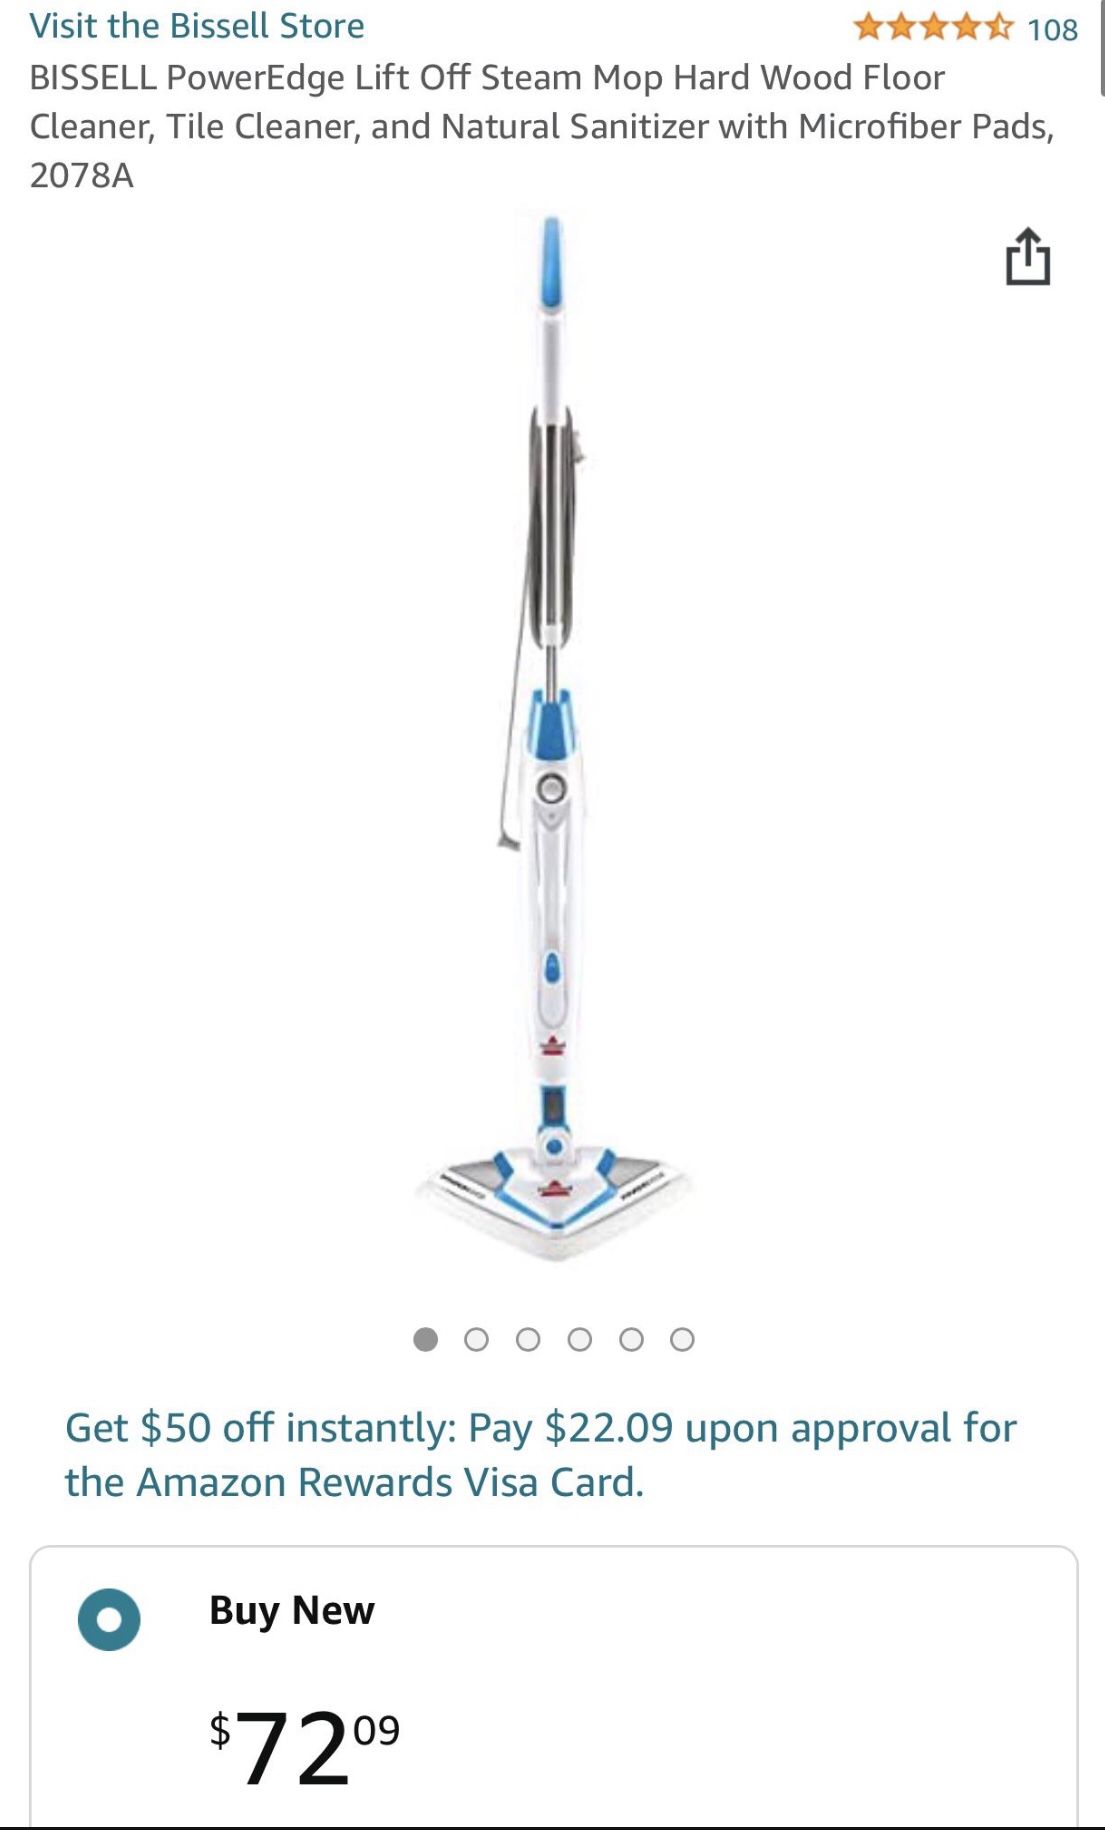 BISSELL PowerEdge Lift Off Steam Mop Hard Wood Floor Cleaner, Tile Cleaner, and Natural Sanitizer